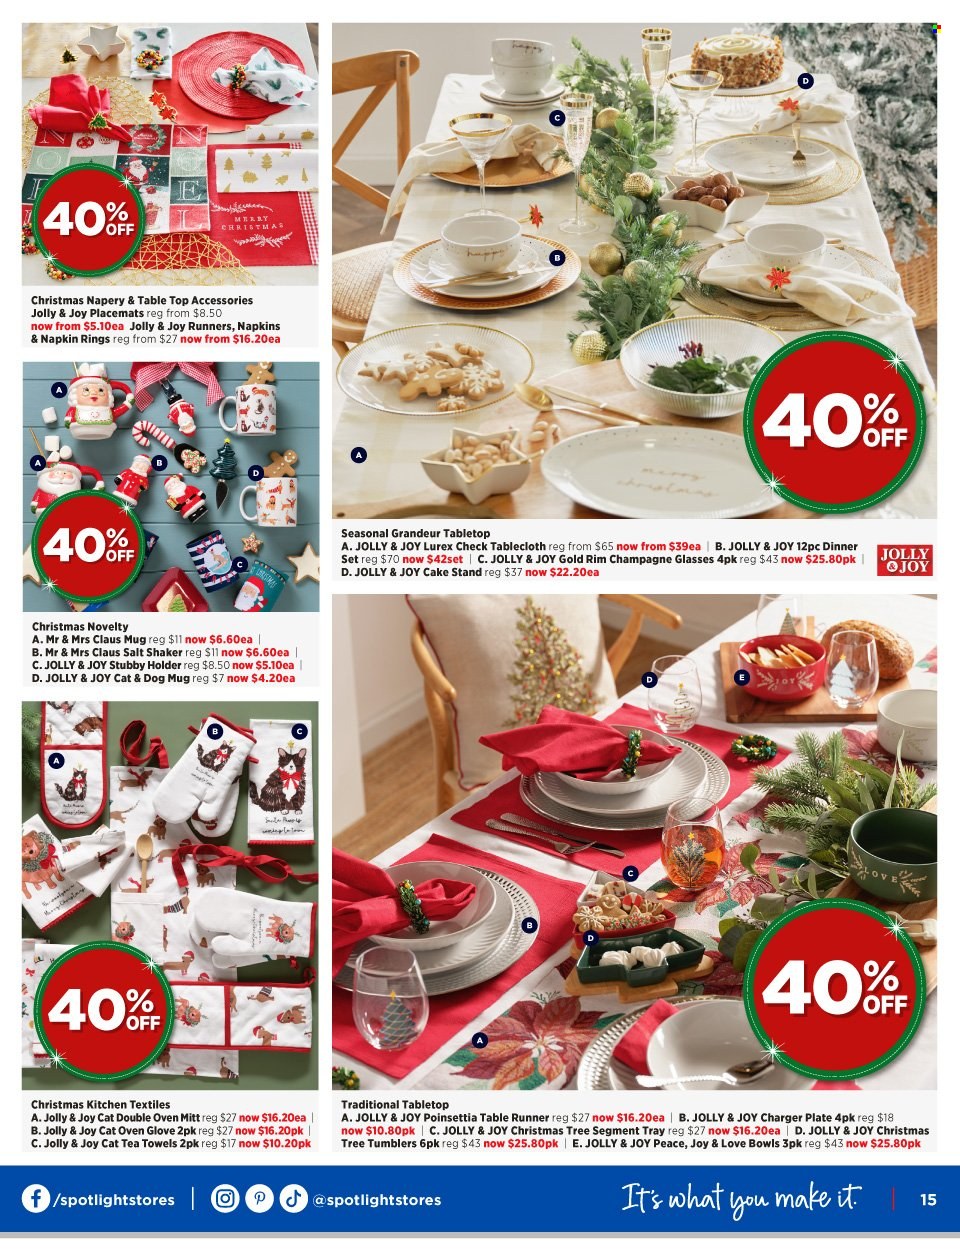 thumbnail - Spotlight mailer - 16.11.2022 - 04.12.2022 - Sales products - holder, gloves, cake stand, dinnerware set, mug, salt shaker, tray, tumbler, plate, oven mitt, shaker, champagne glass, table runner, tablecloth, napkins, tea towels, placemat, towel, christmas tree, poinsettia. Page 15.